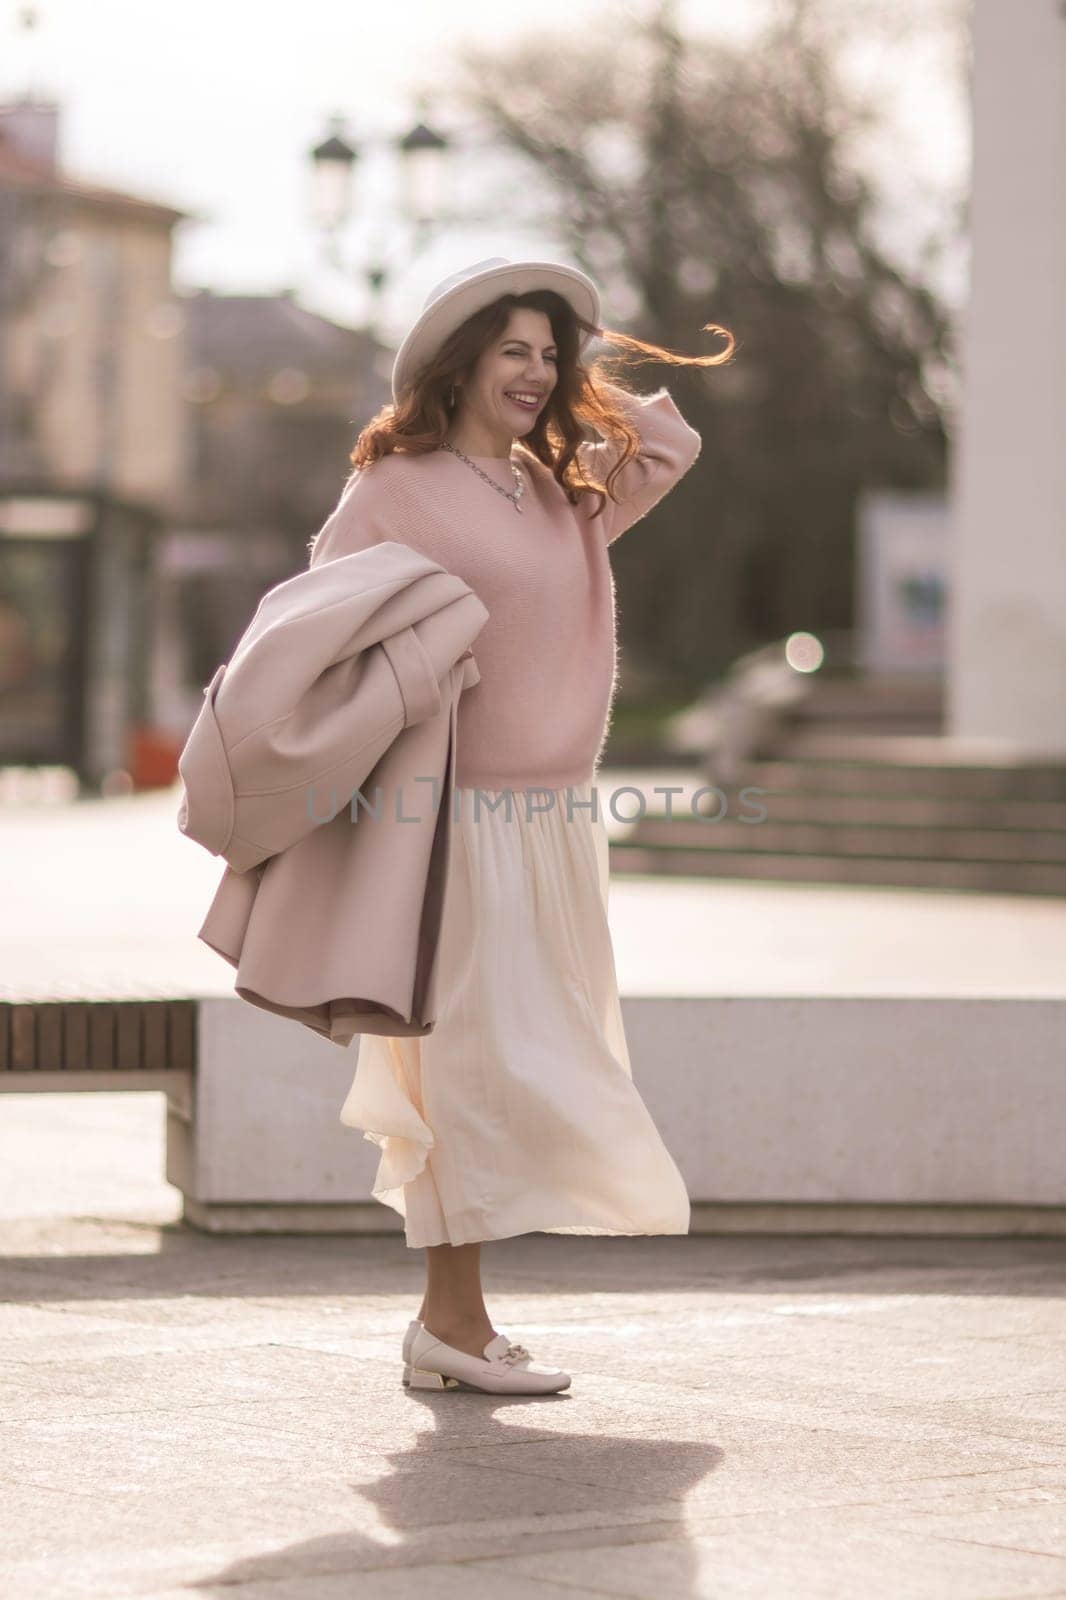 A woman wearing a pink sweater and white skirt is smiling and holding a brown bag. The scene has a warm and cheerful mood, with the woman looking happy and confident. by Matiunina